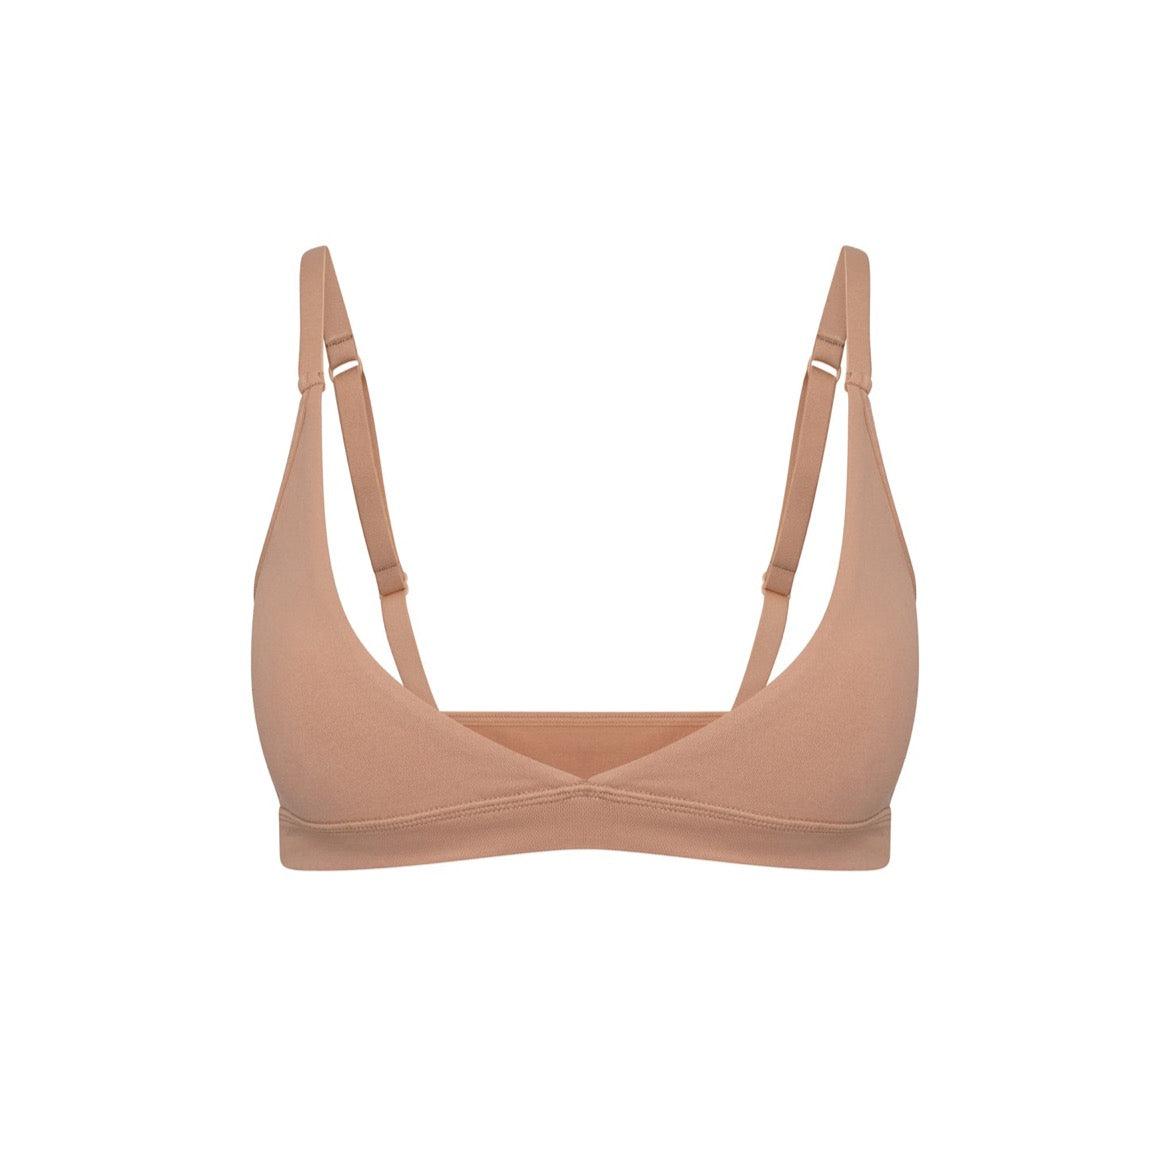 Triangle Bralette- Clay - The NAP Co.